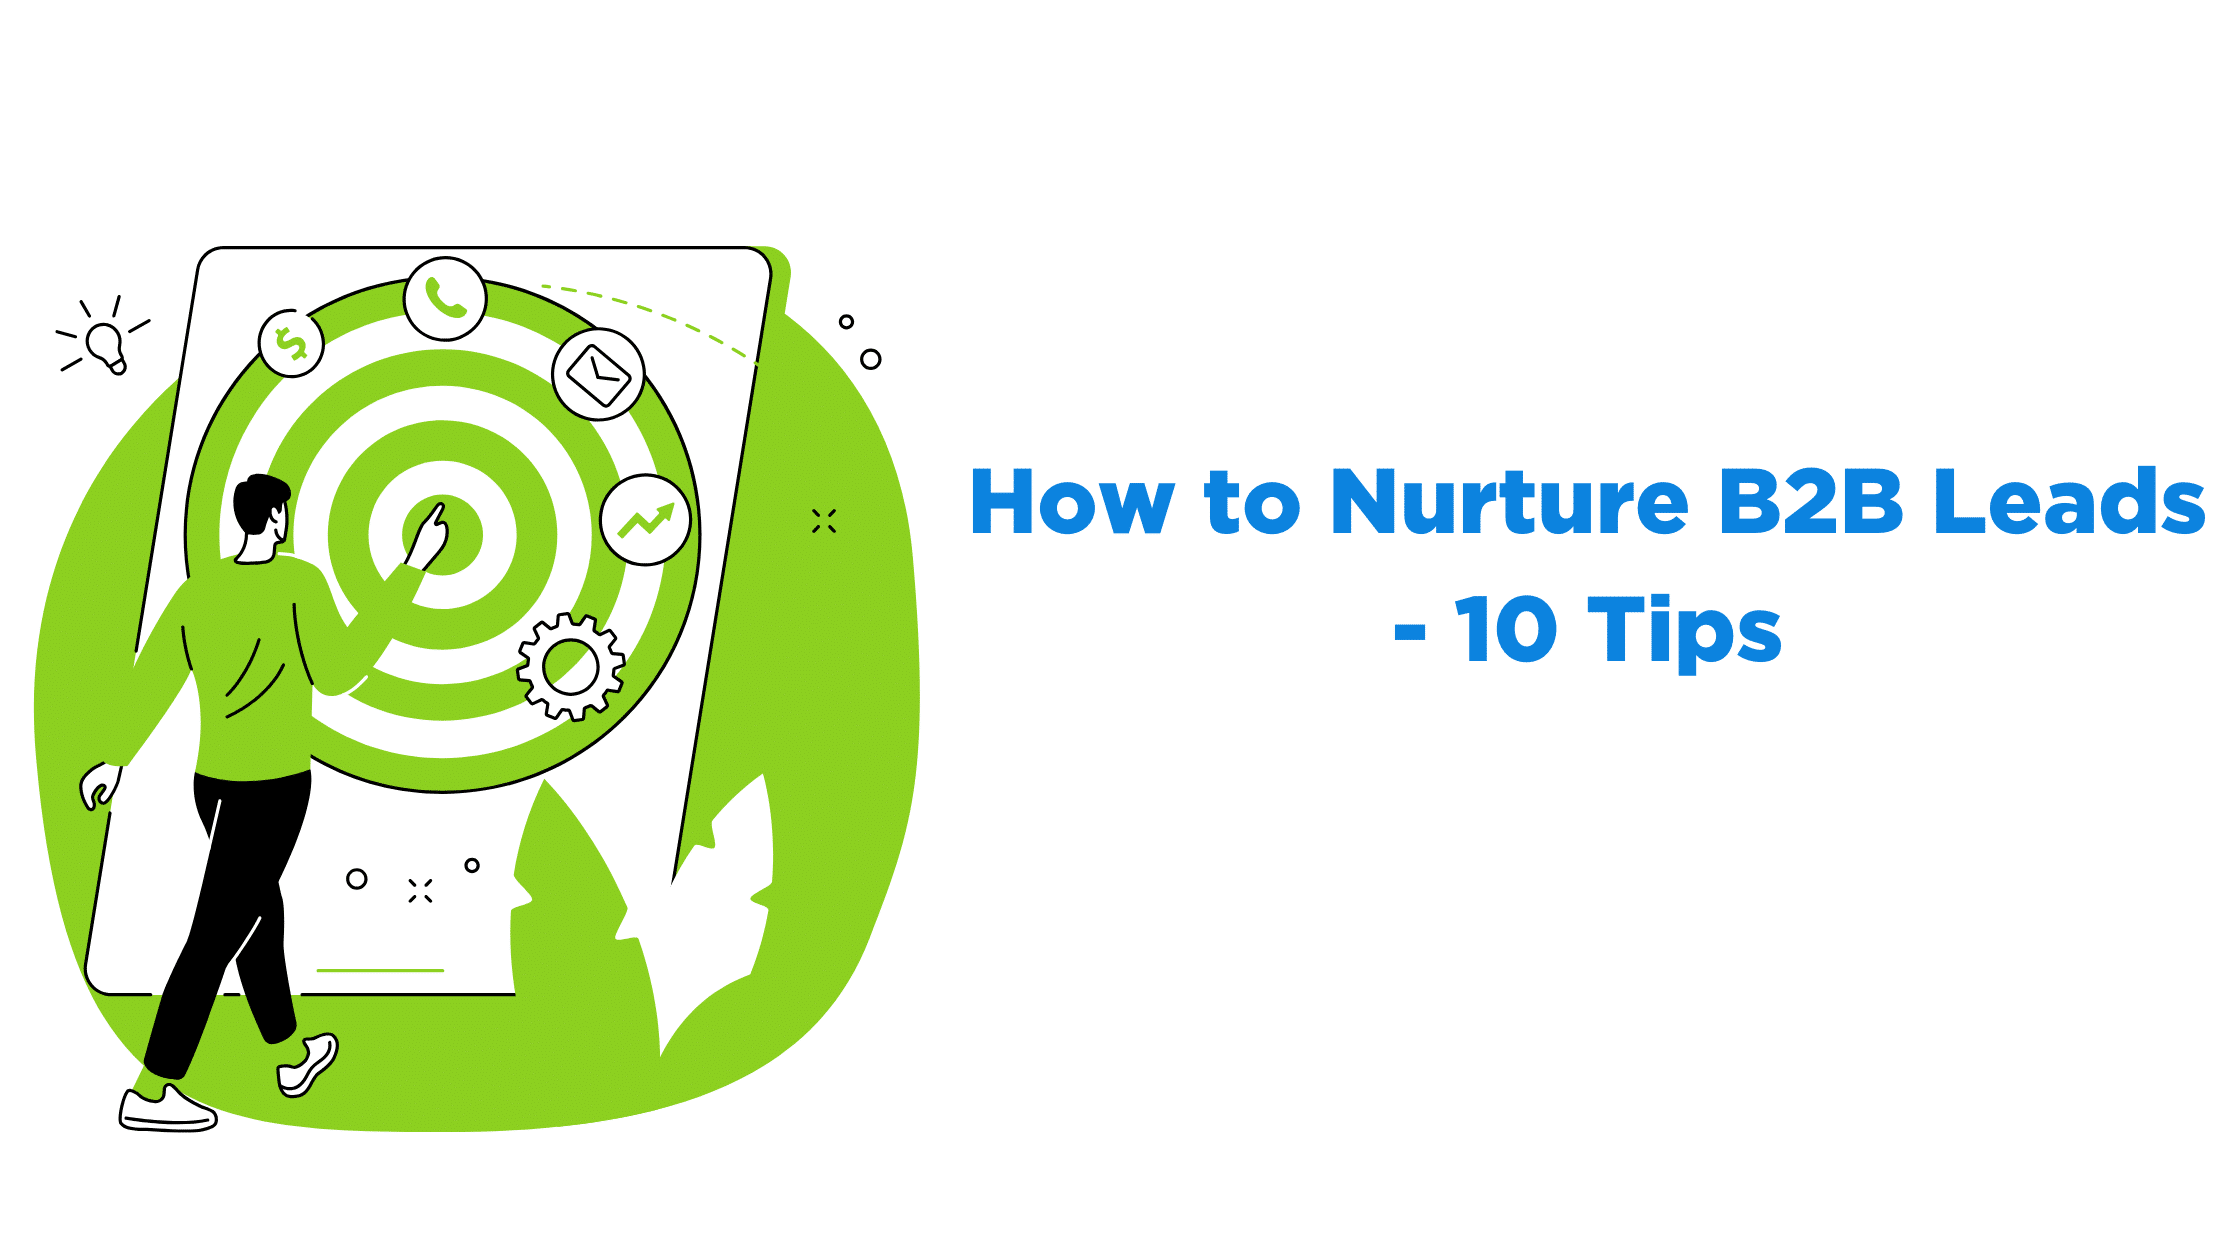 How to Nurture B2B Leads - 10 Tips